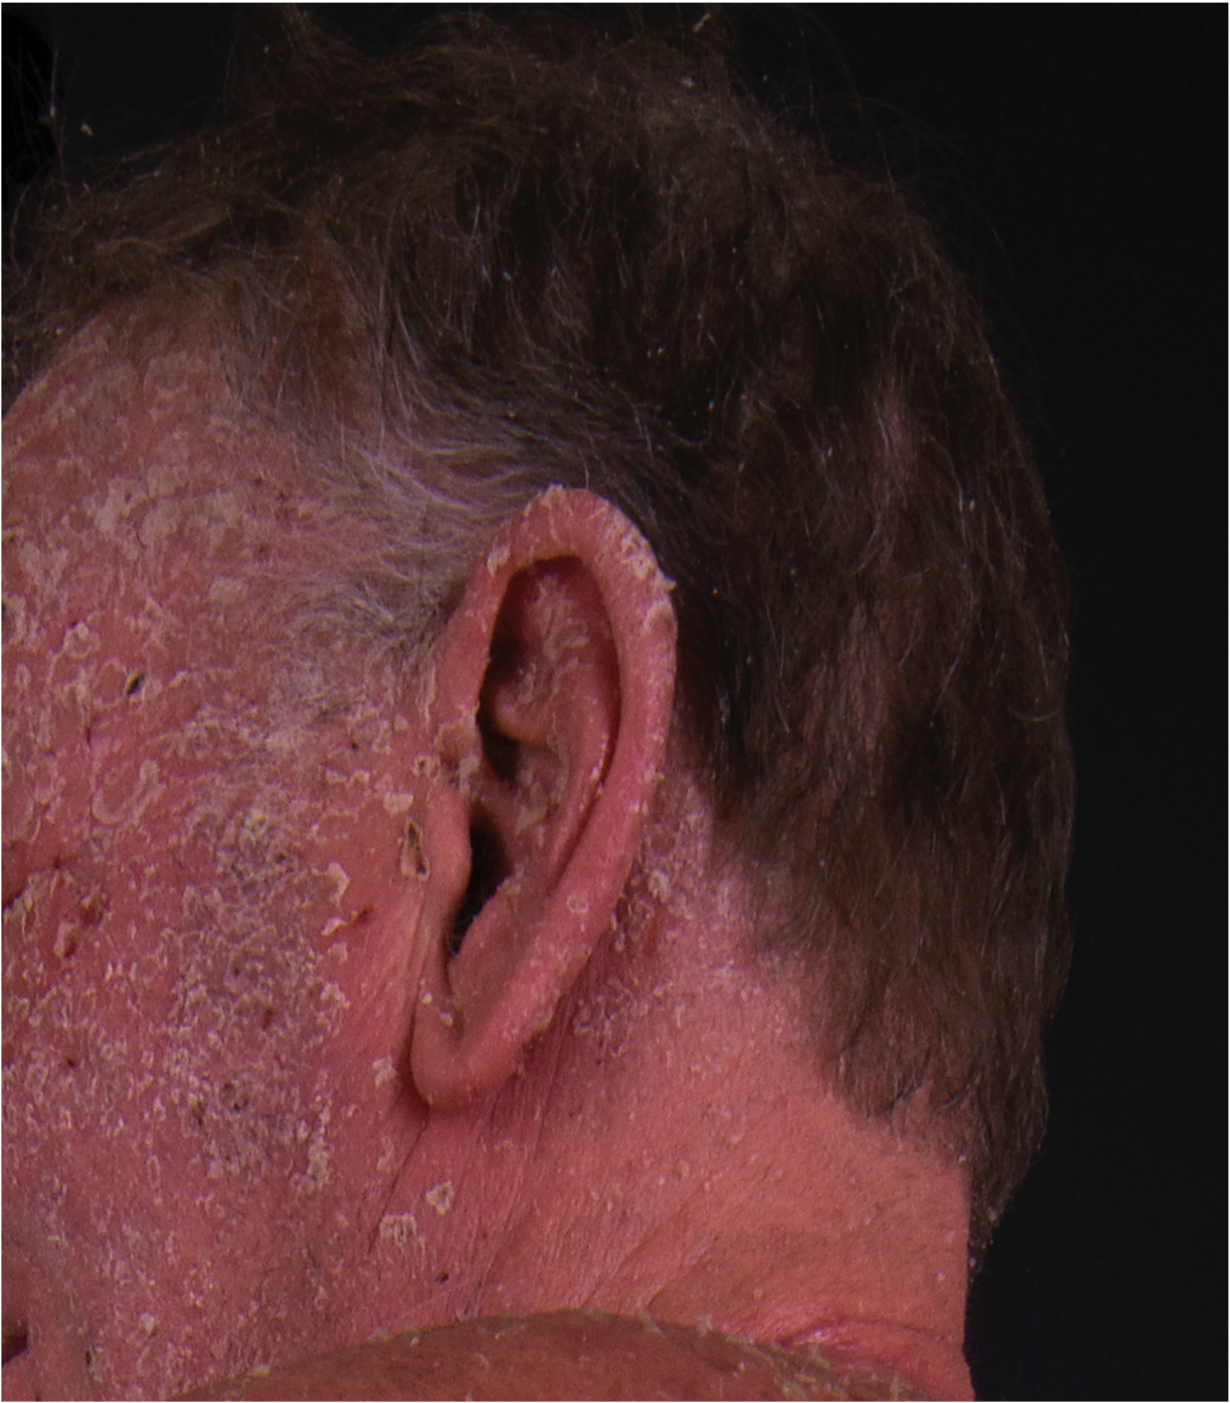 <p>Facial Pityriasis Rubra Pilaris. PRP with lateral facial involvement and thicker plate-like scale.</p>